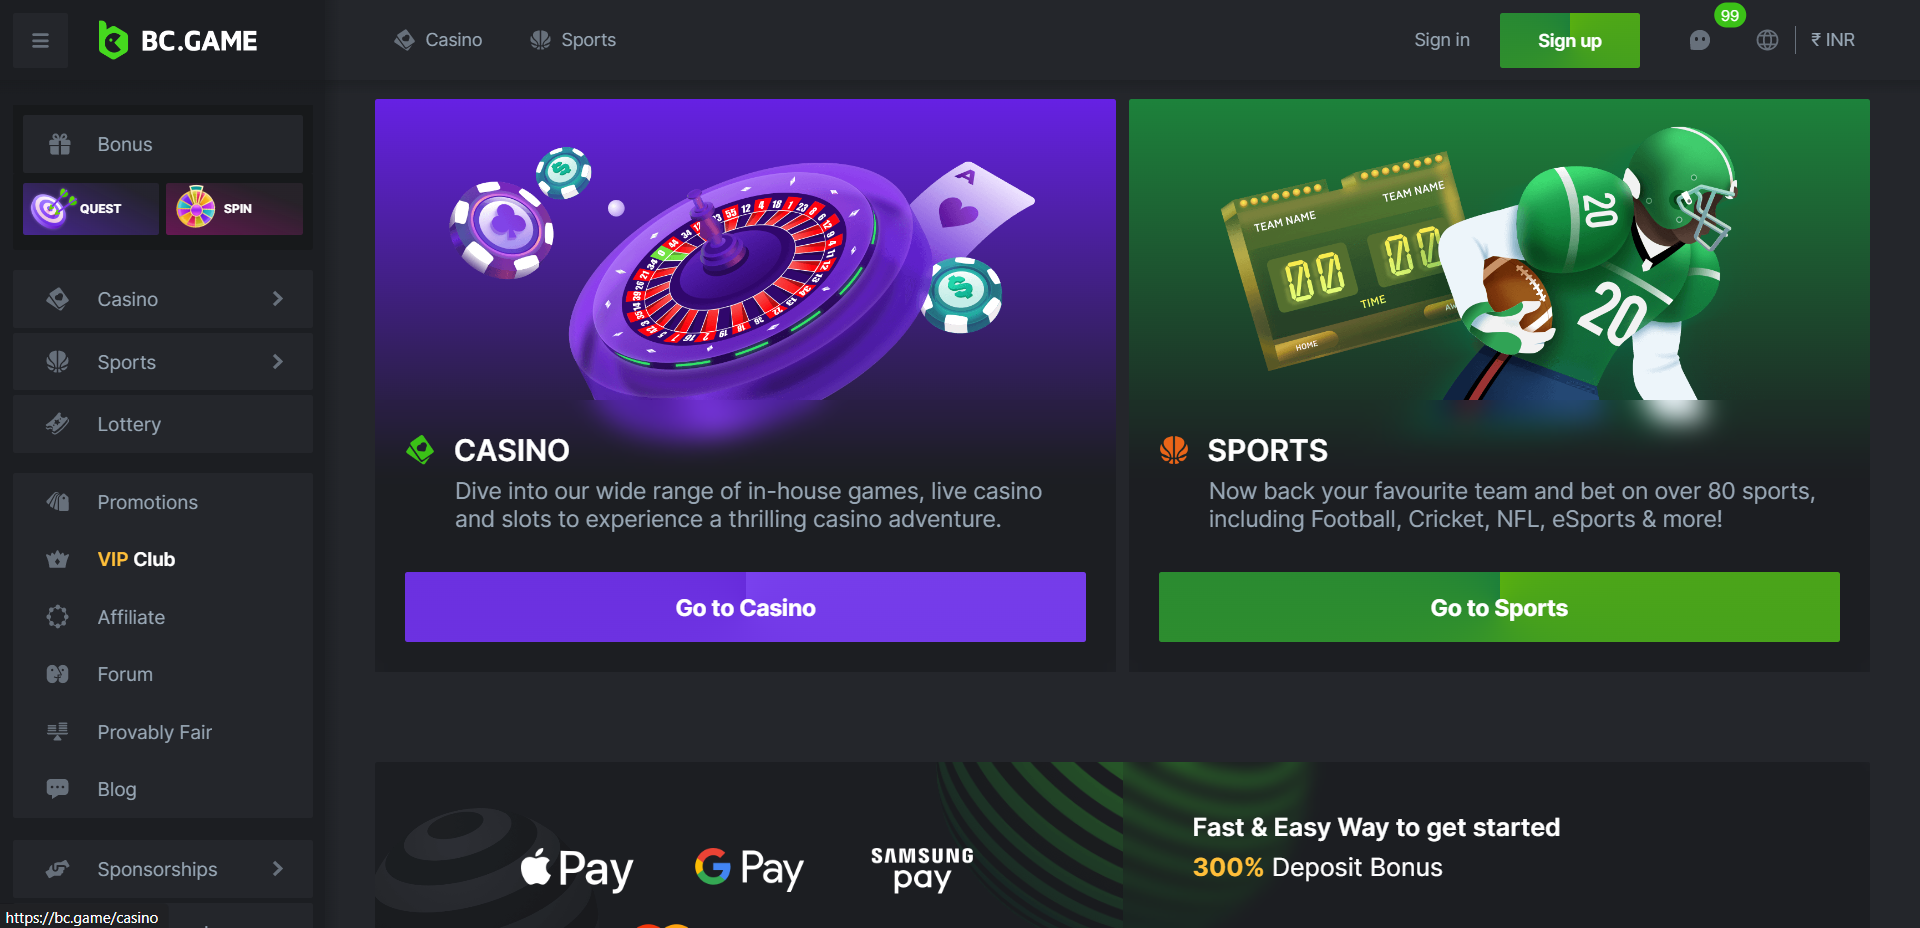 1win.com: Your Ultimate Gaming Destination